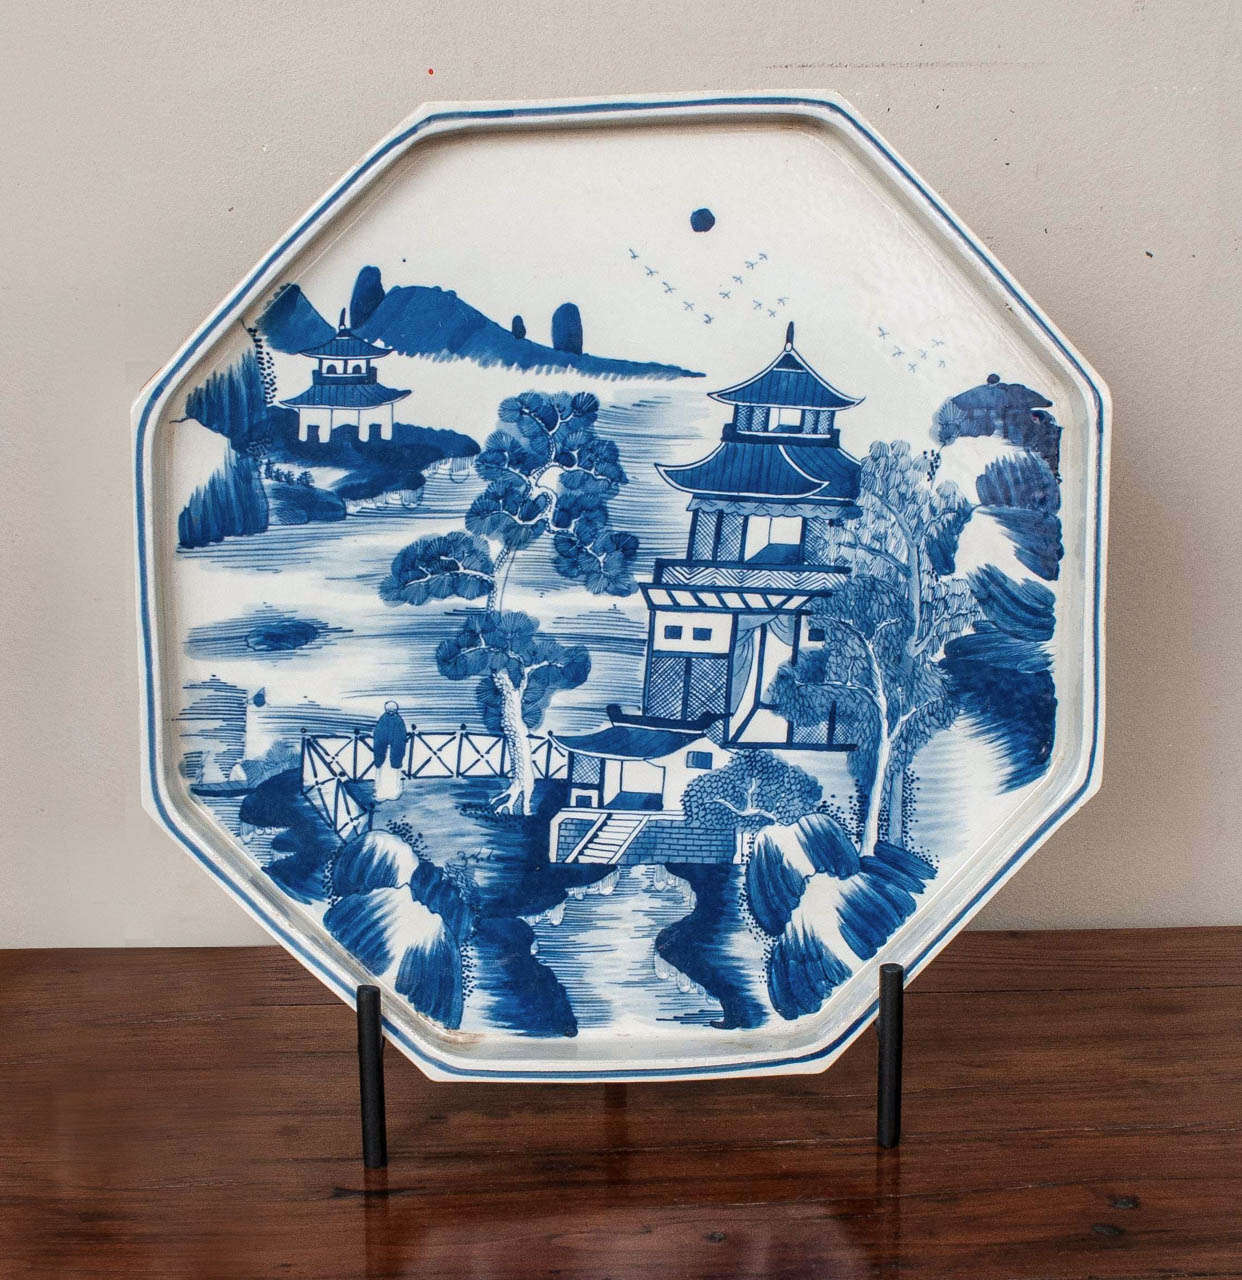 Octagonal tray or charger depicting traditional pagoda set in picturesque landscape.